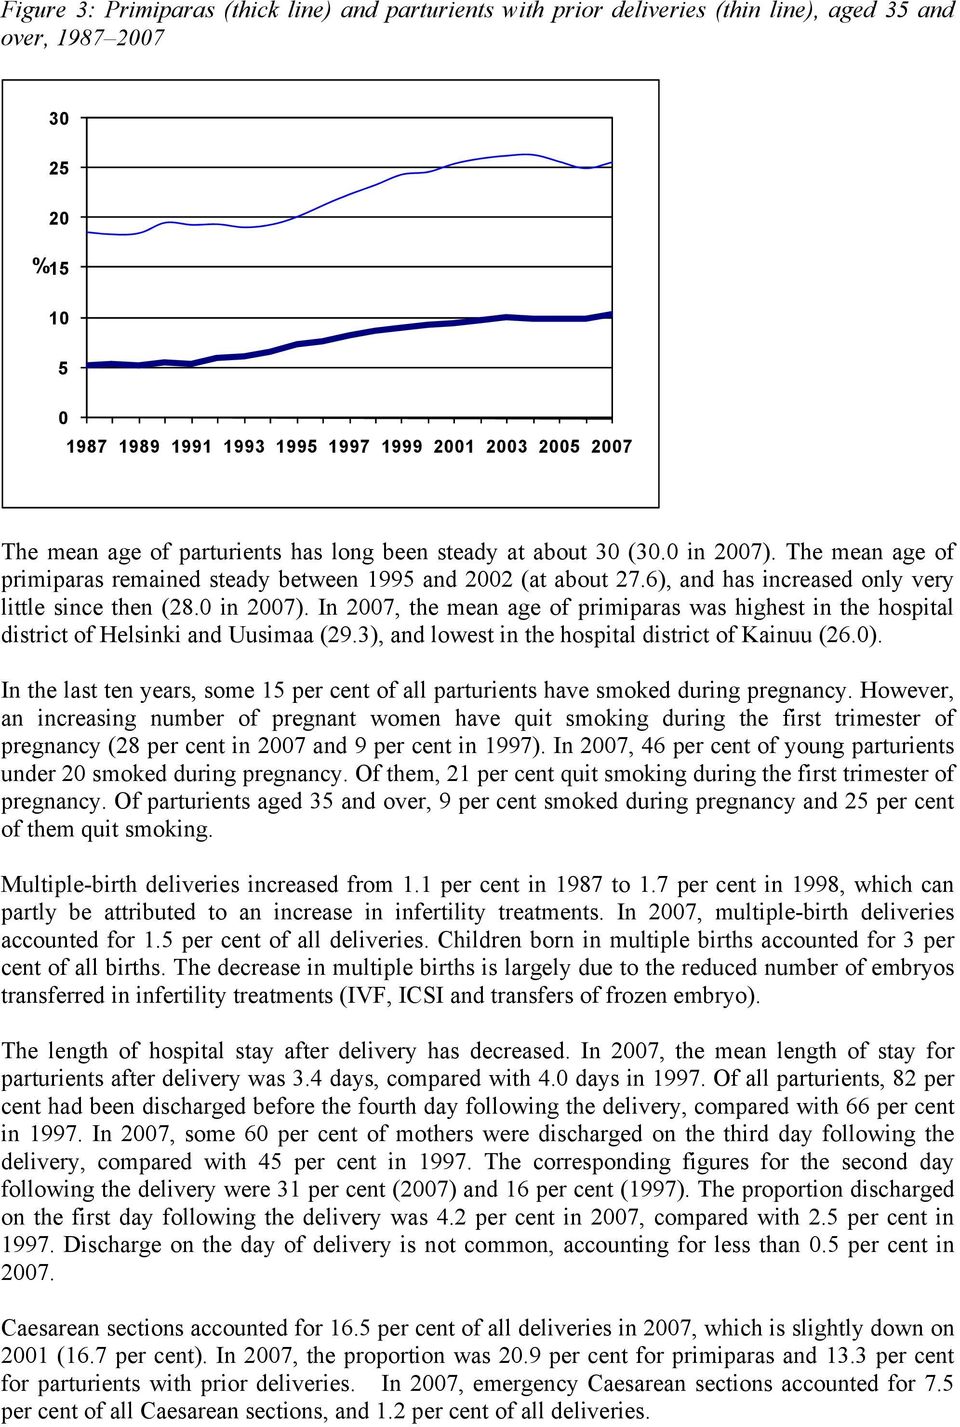 0 in 2007). In 2007, the mean age of primiparas was highest in the hospital district of Helsinki and Uusimaa (29.3), and lowest in the hospital district of Kainuu (26.0).